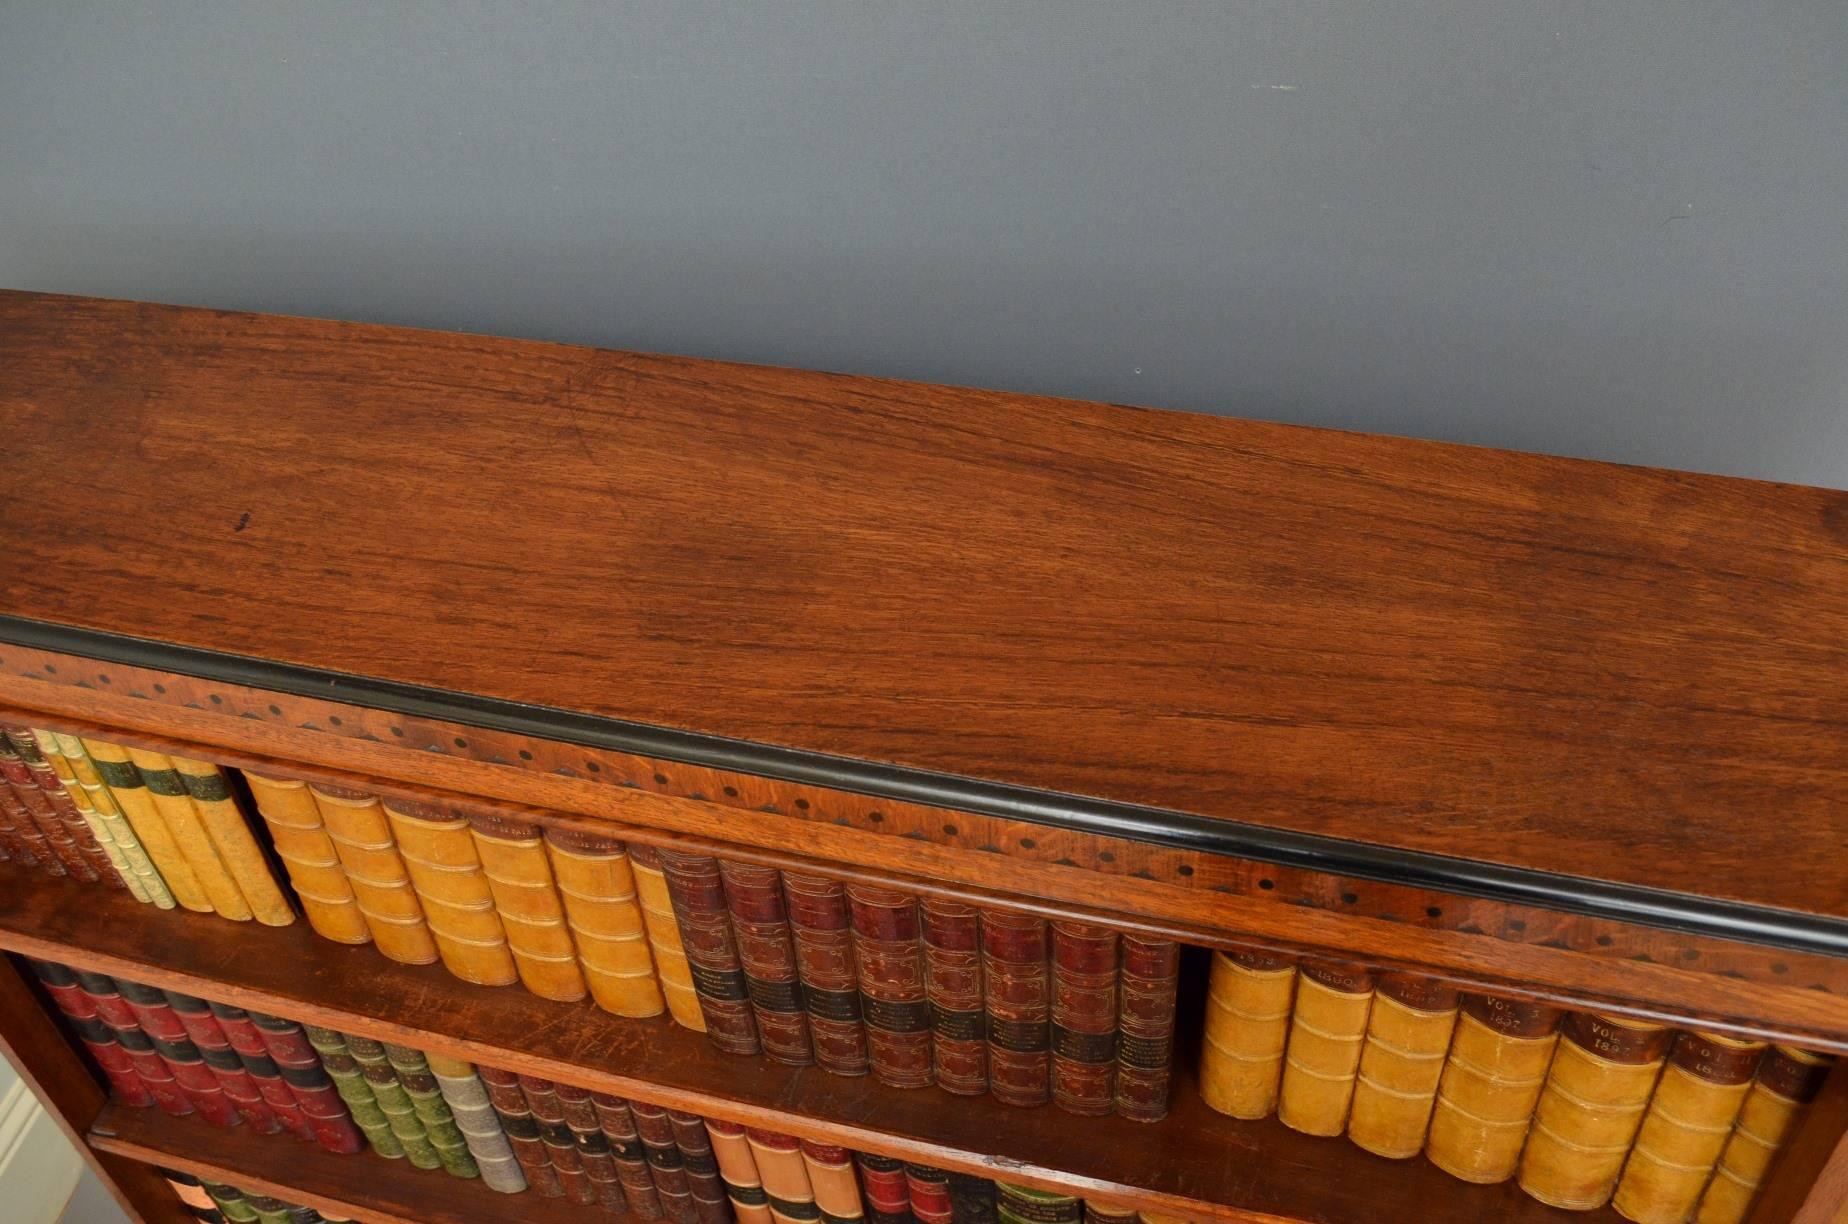 J00 late Victorian, Aesthetic Movement oak open bookcase, having moulded top with ebonized edge above three height adjustable shelves flanked by canted string inlaid pilasters, all standing on plinth base. This bookcase retains its original finish,